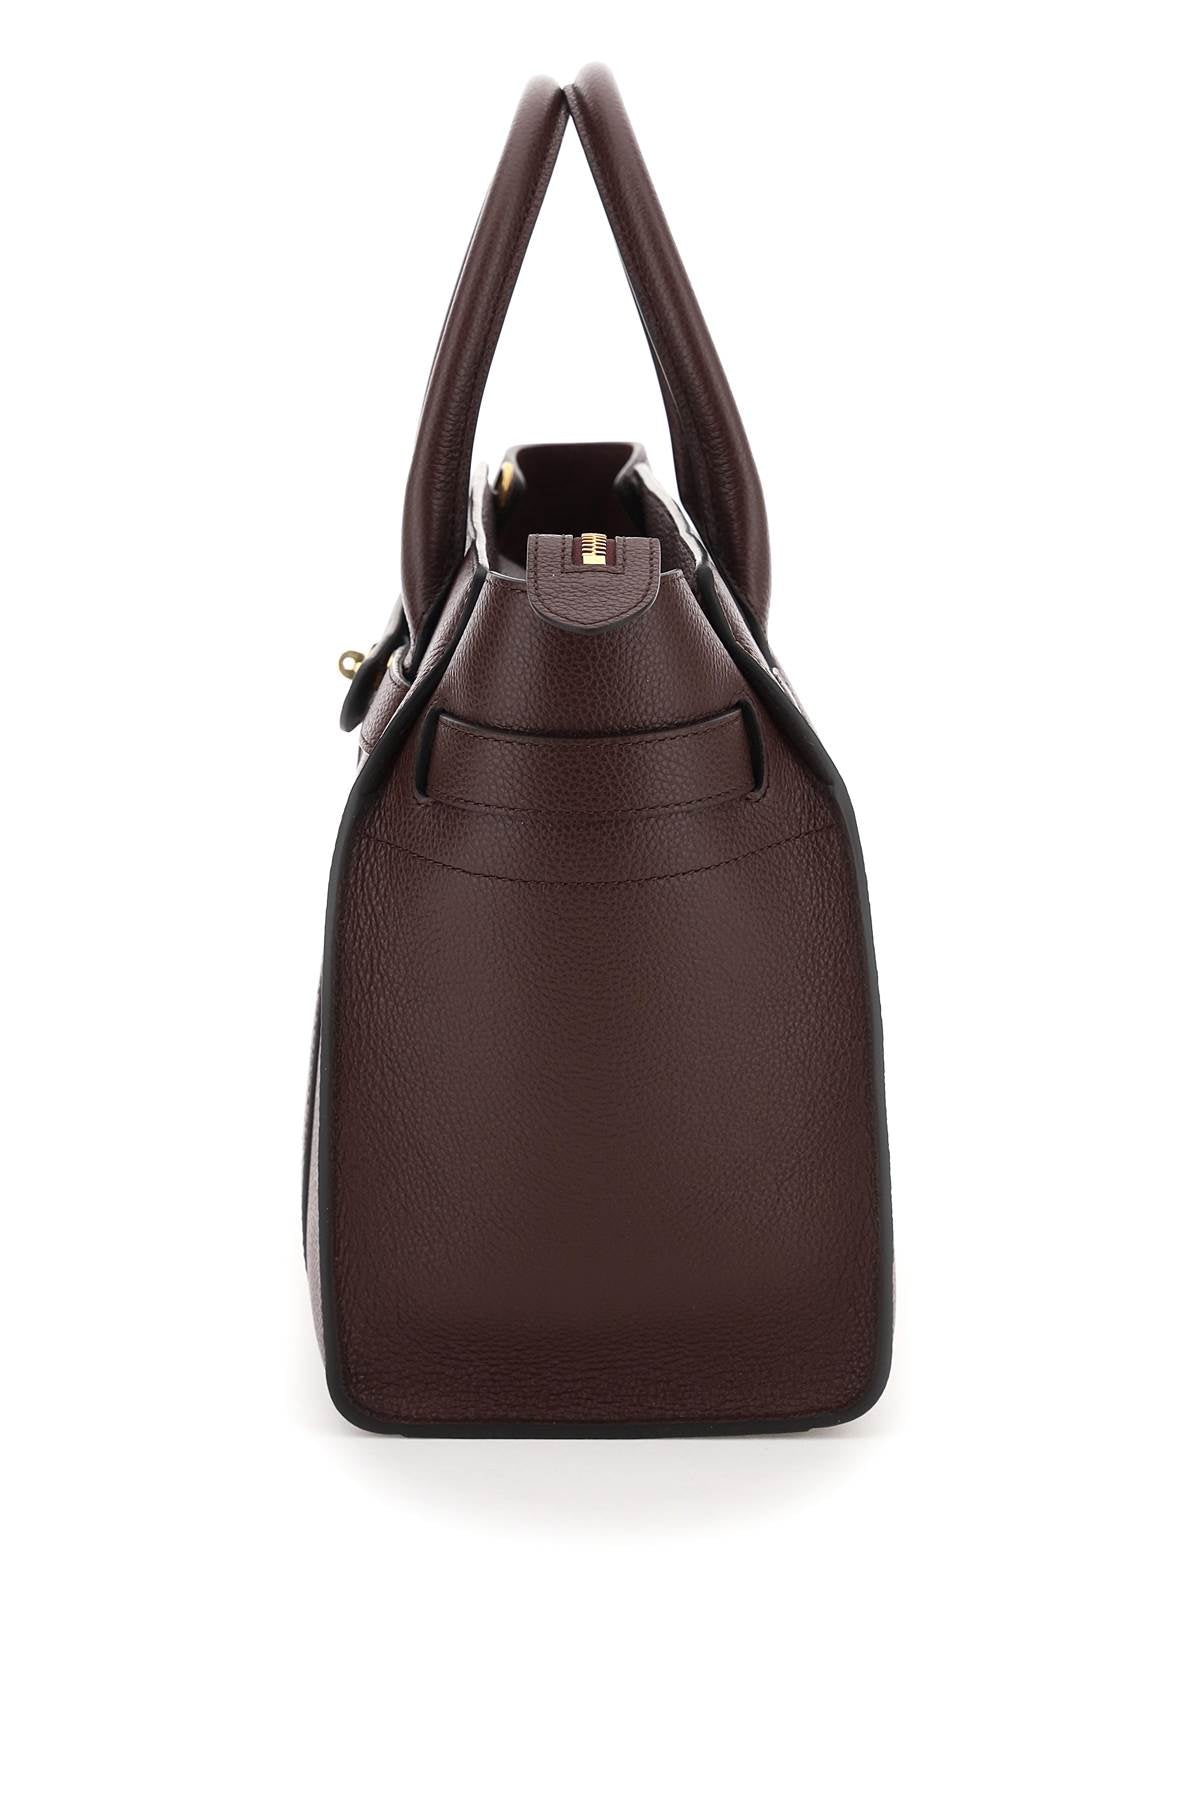 MULBERRY Red Grained Leather Handbag with Double Handle, Zip Closure, and Iconic Twist Lock for Women - SS24 Collection